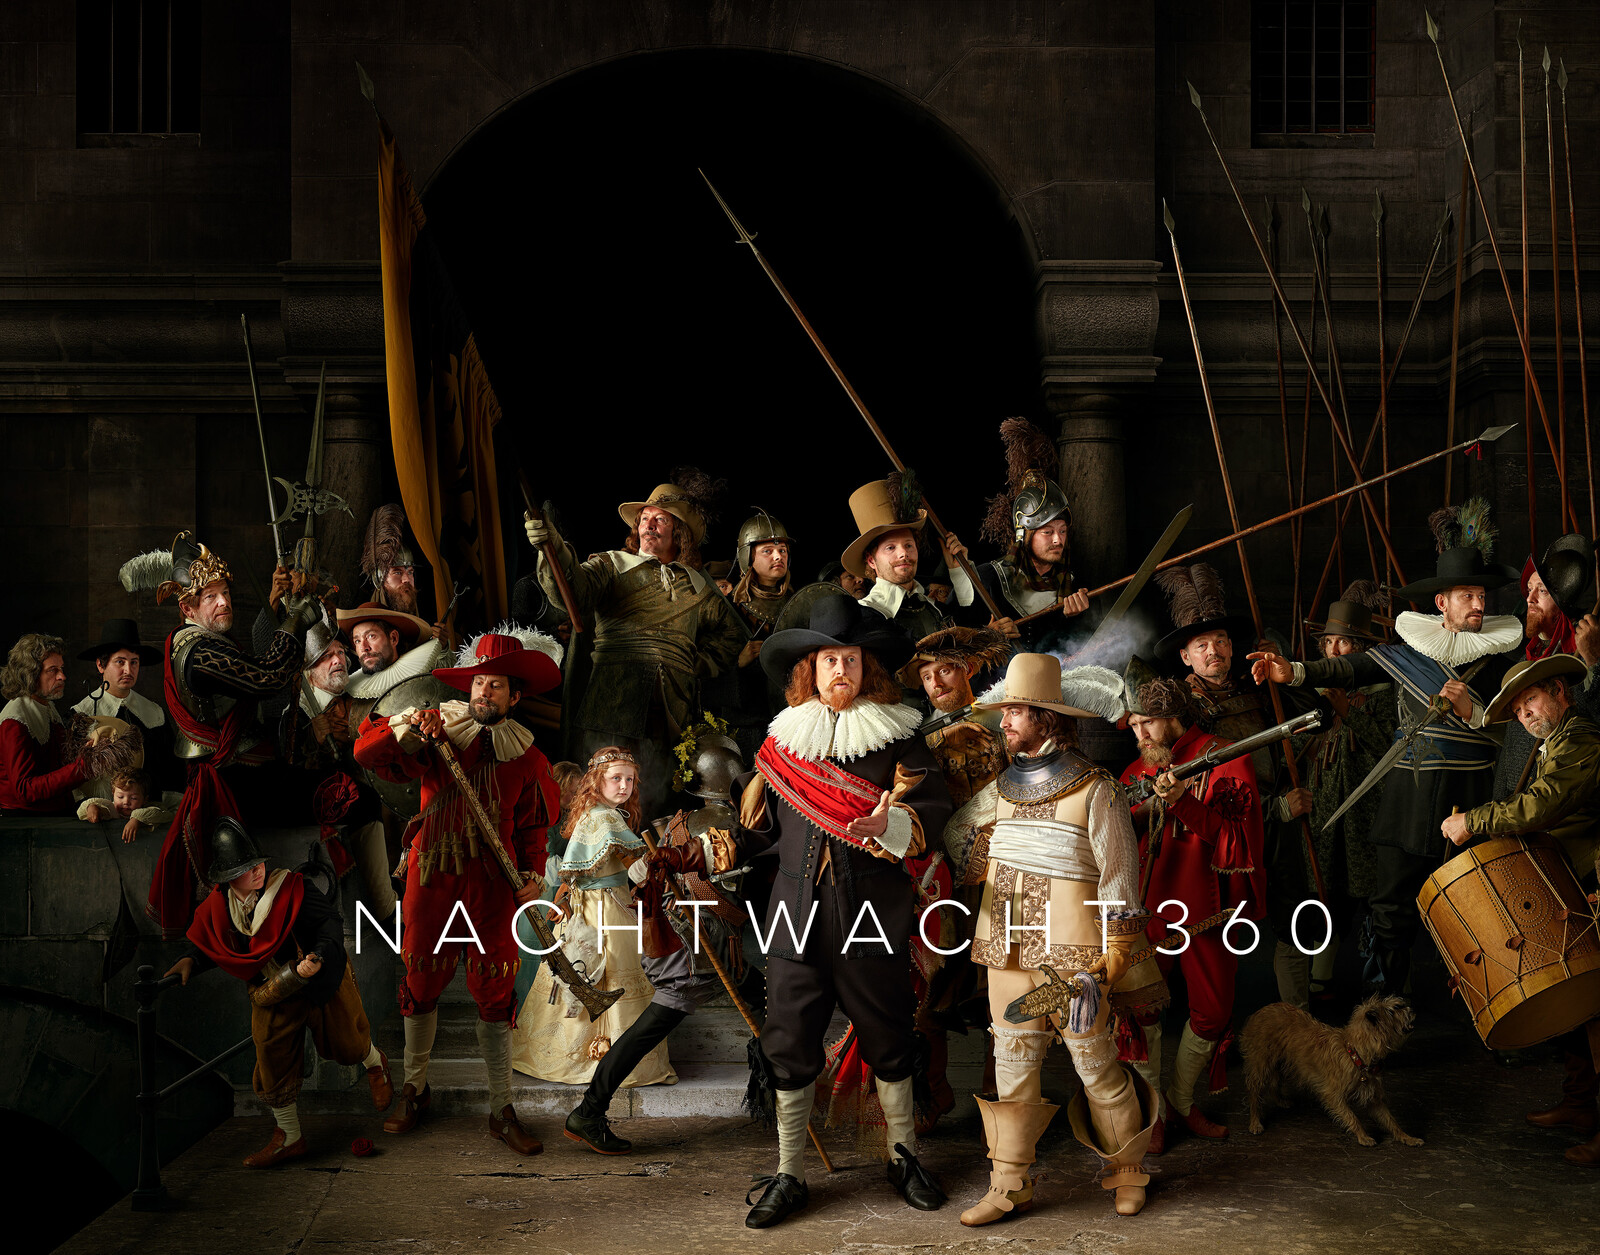 The final photograph depicting The Night Watch